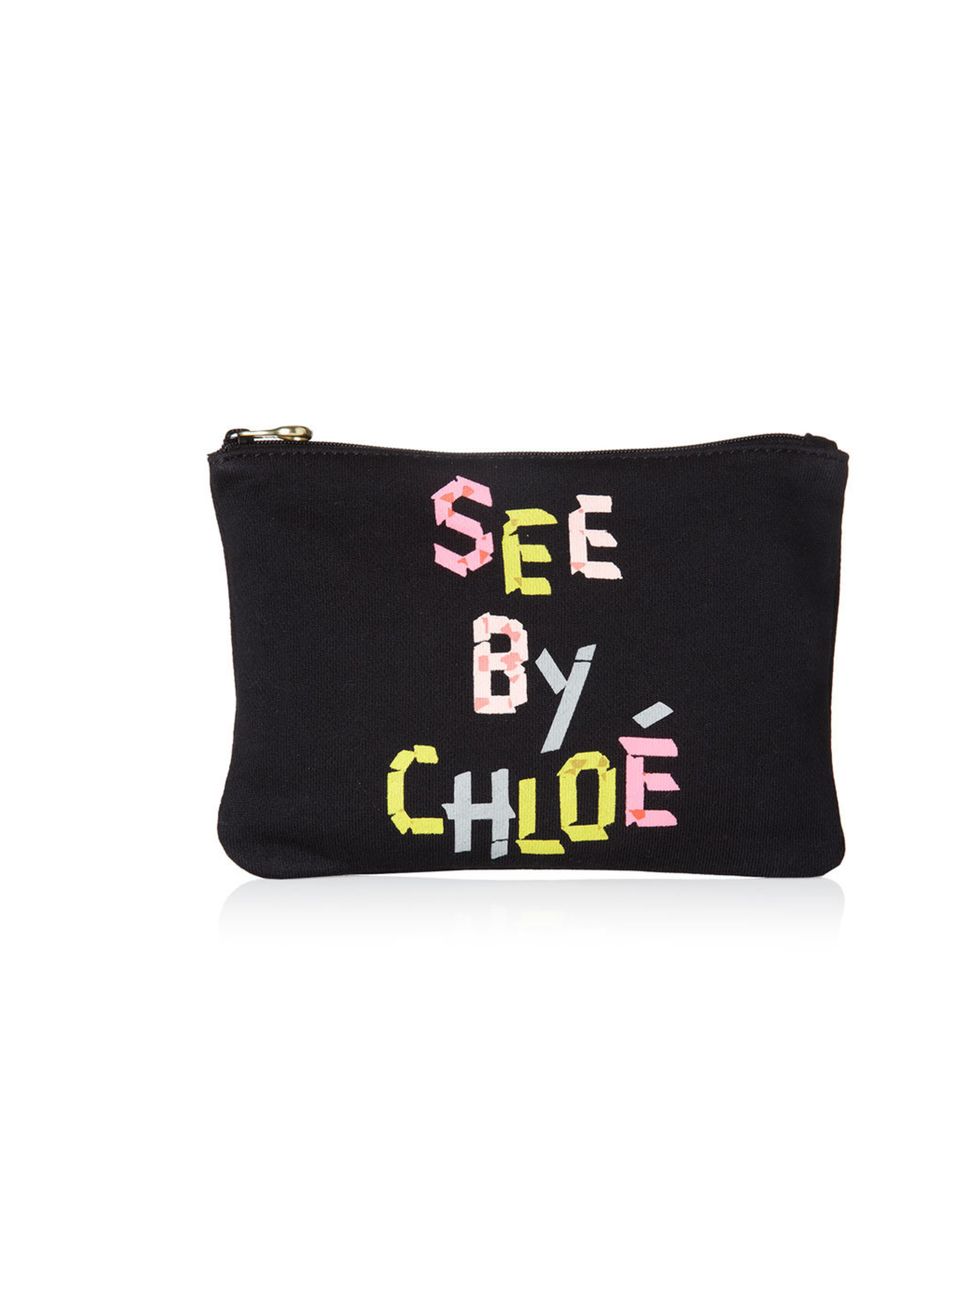 <p>See by Chloe cotton clutch, £33.95, at Harrods</p><p><a href="http://shopping.elleuk.com/browse?fts=see+by+chloe+tape+pouch">BUY NOW</a></p>